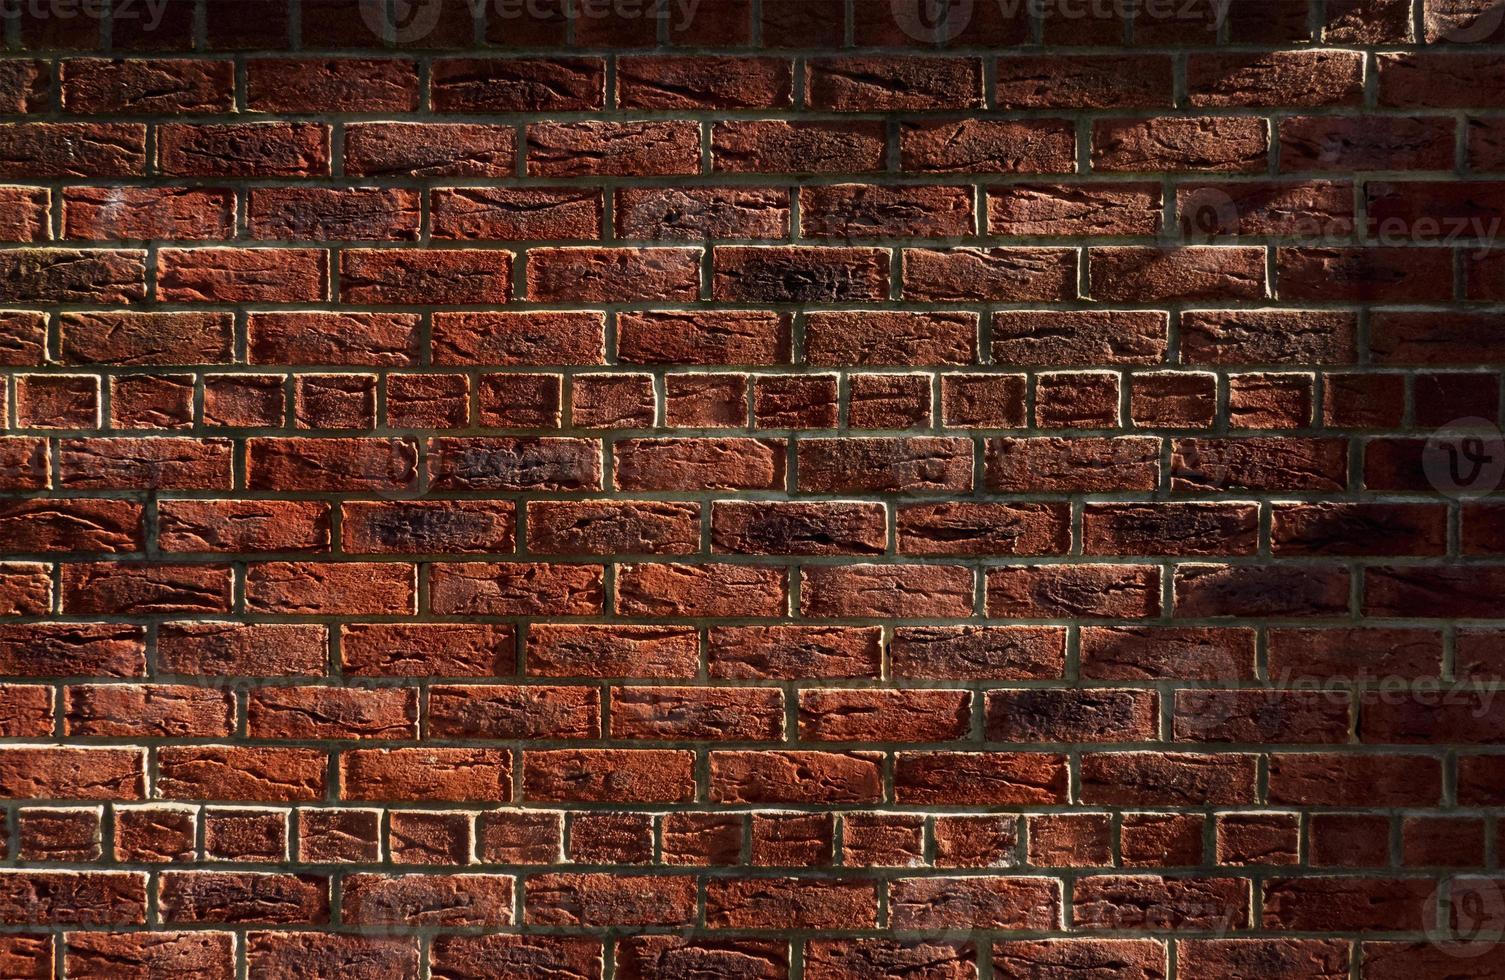 Brick wall with light and shadow,House wall red grunge stones background, Horizontal backdrop Abstract with broken bricks texture, English heritage old Vintage house wall with cracks and scratches photo